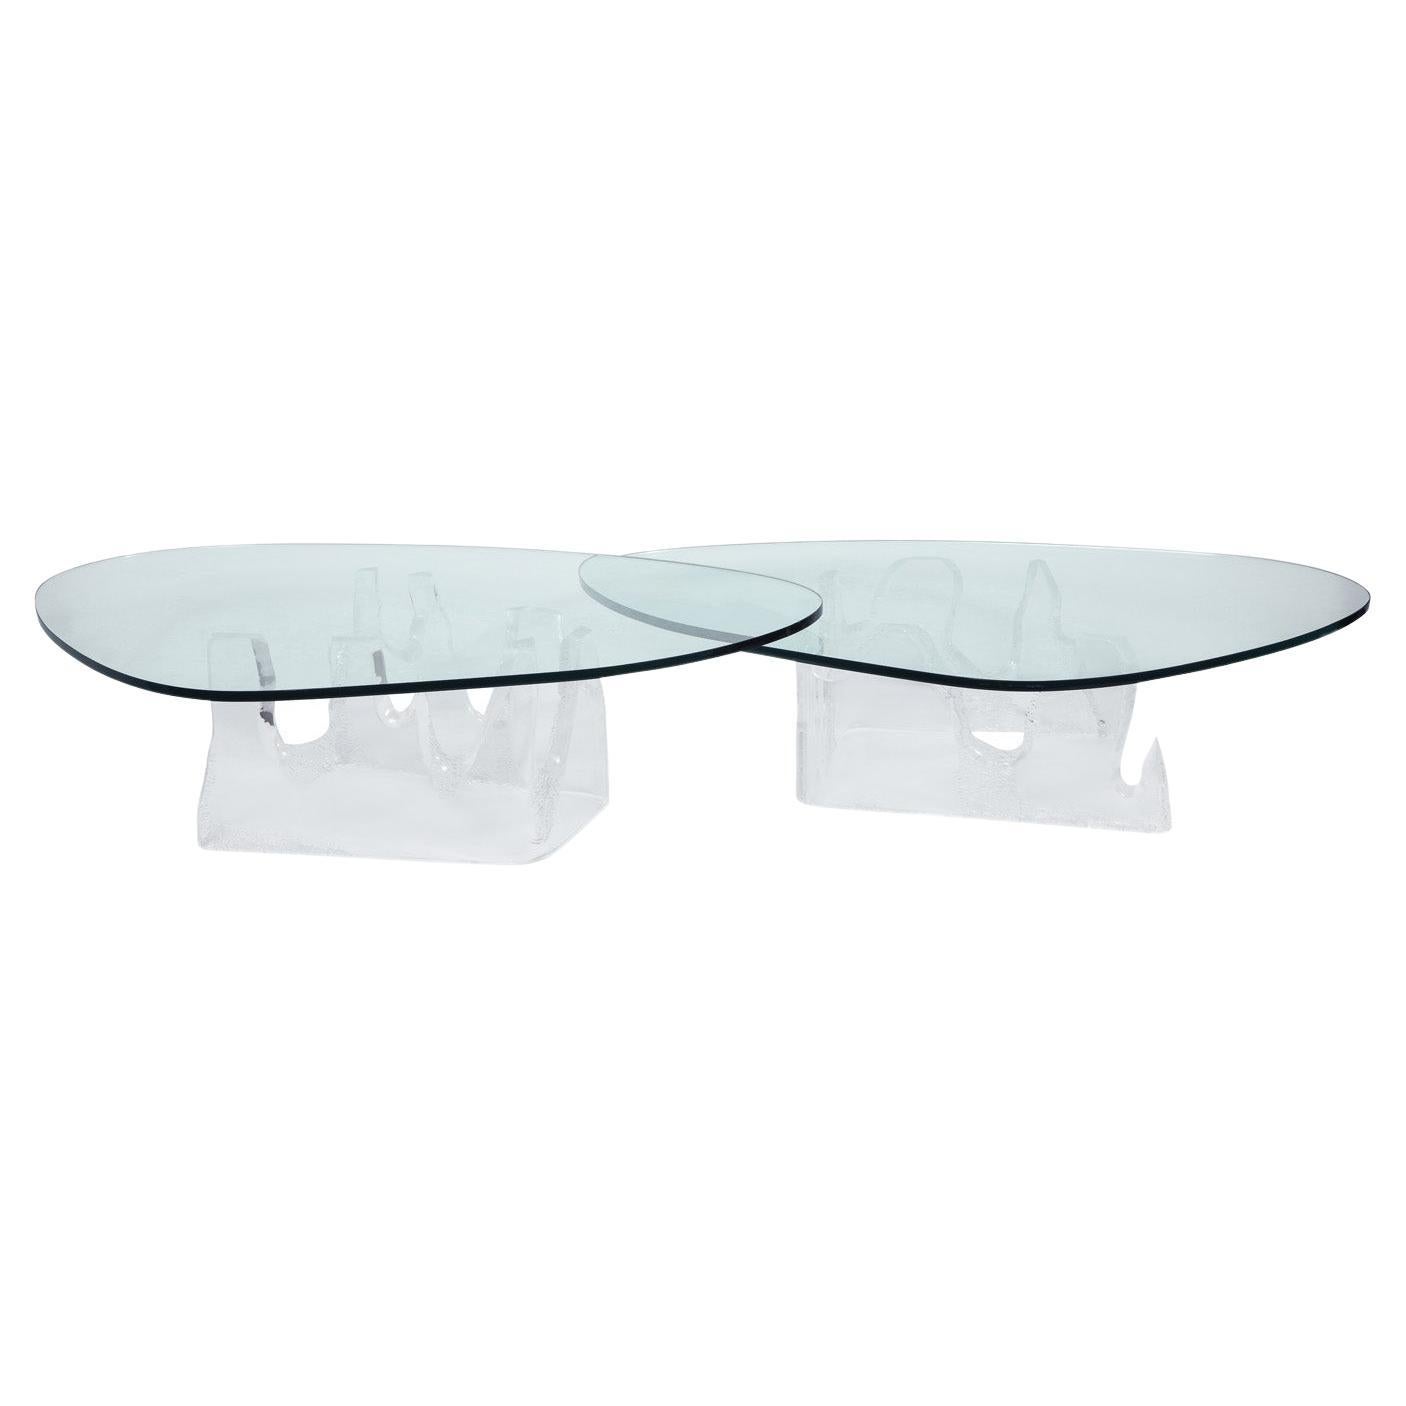 Sculptural Pair of Free Form Coffee Tables in Lucite with Glass Tops, 1970s